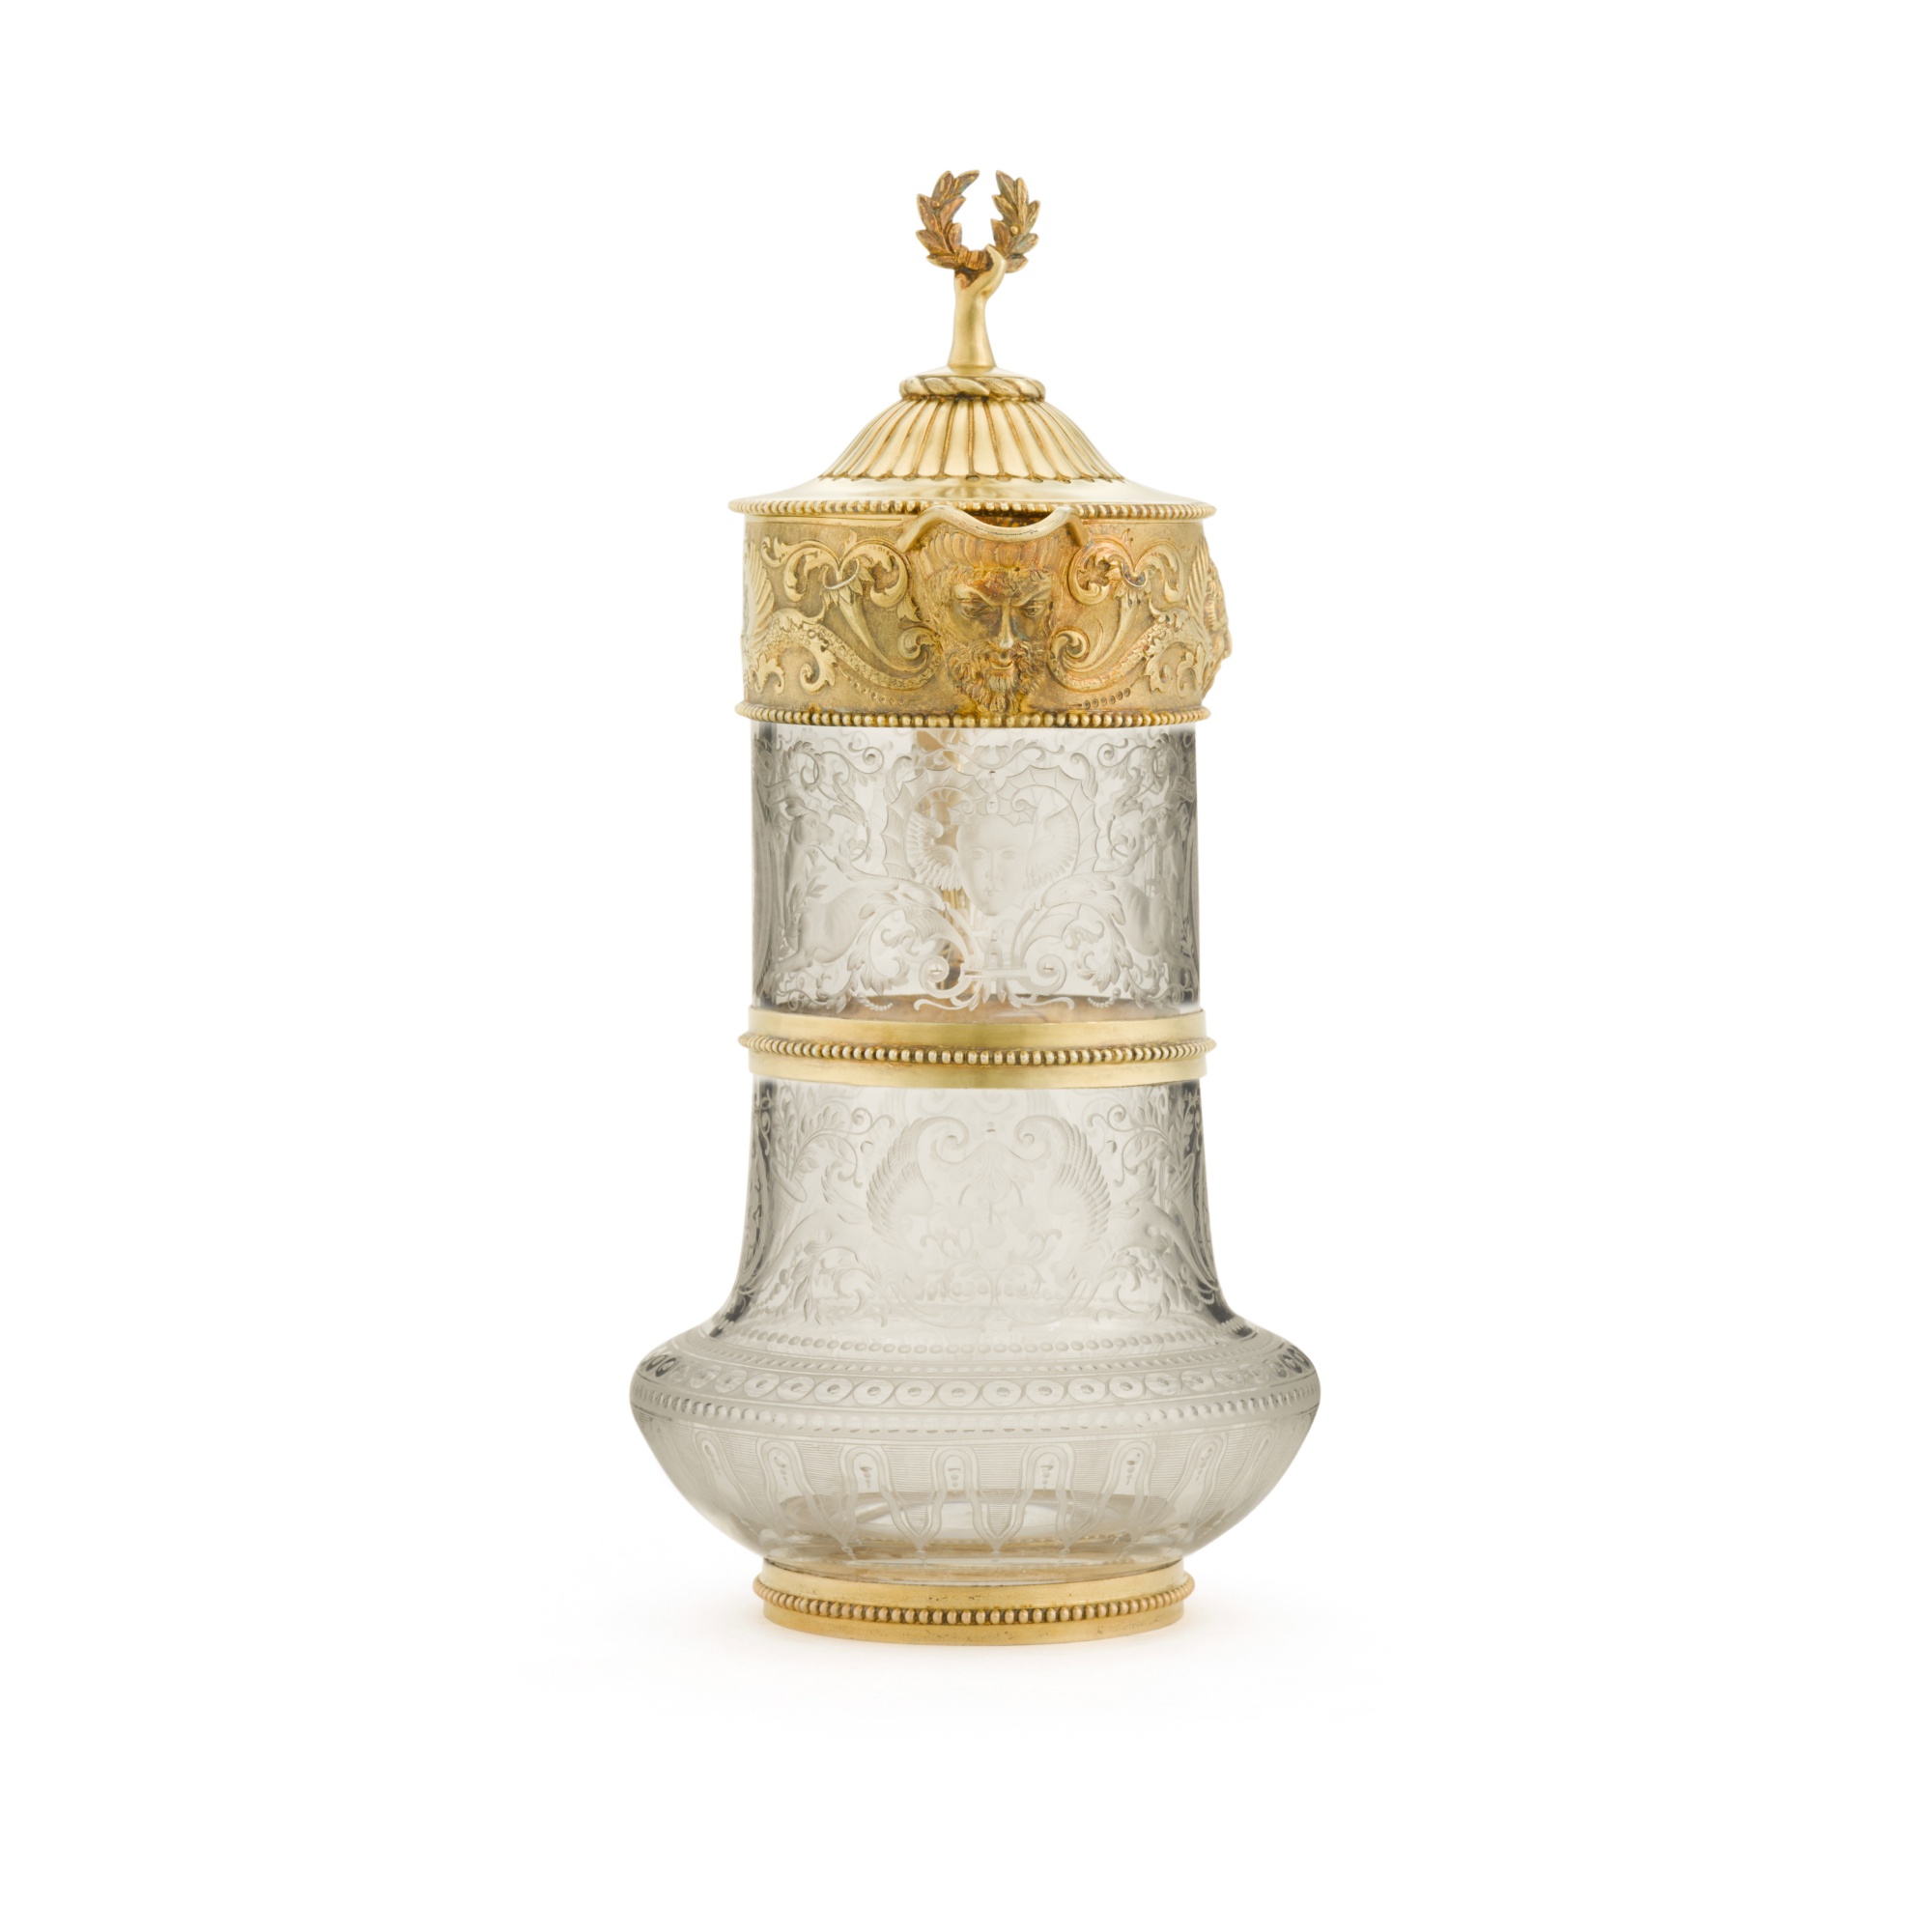 A Victorian silver-gilt-mounted glass claret jug, William & George Sissons, Sheffield, 1869 - Image 5 of 5